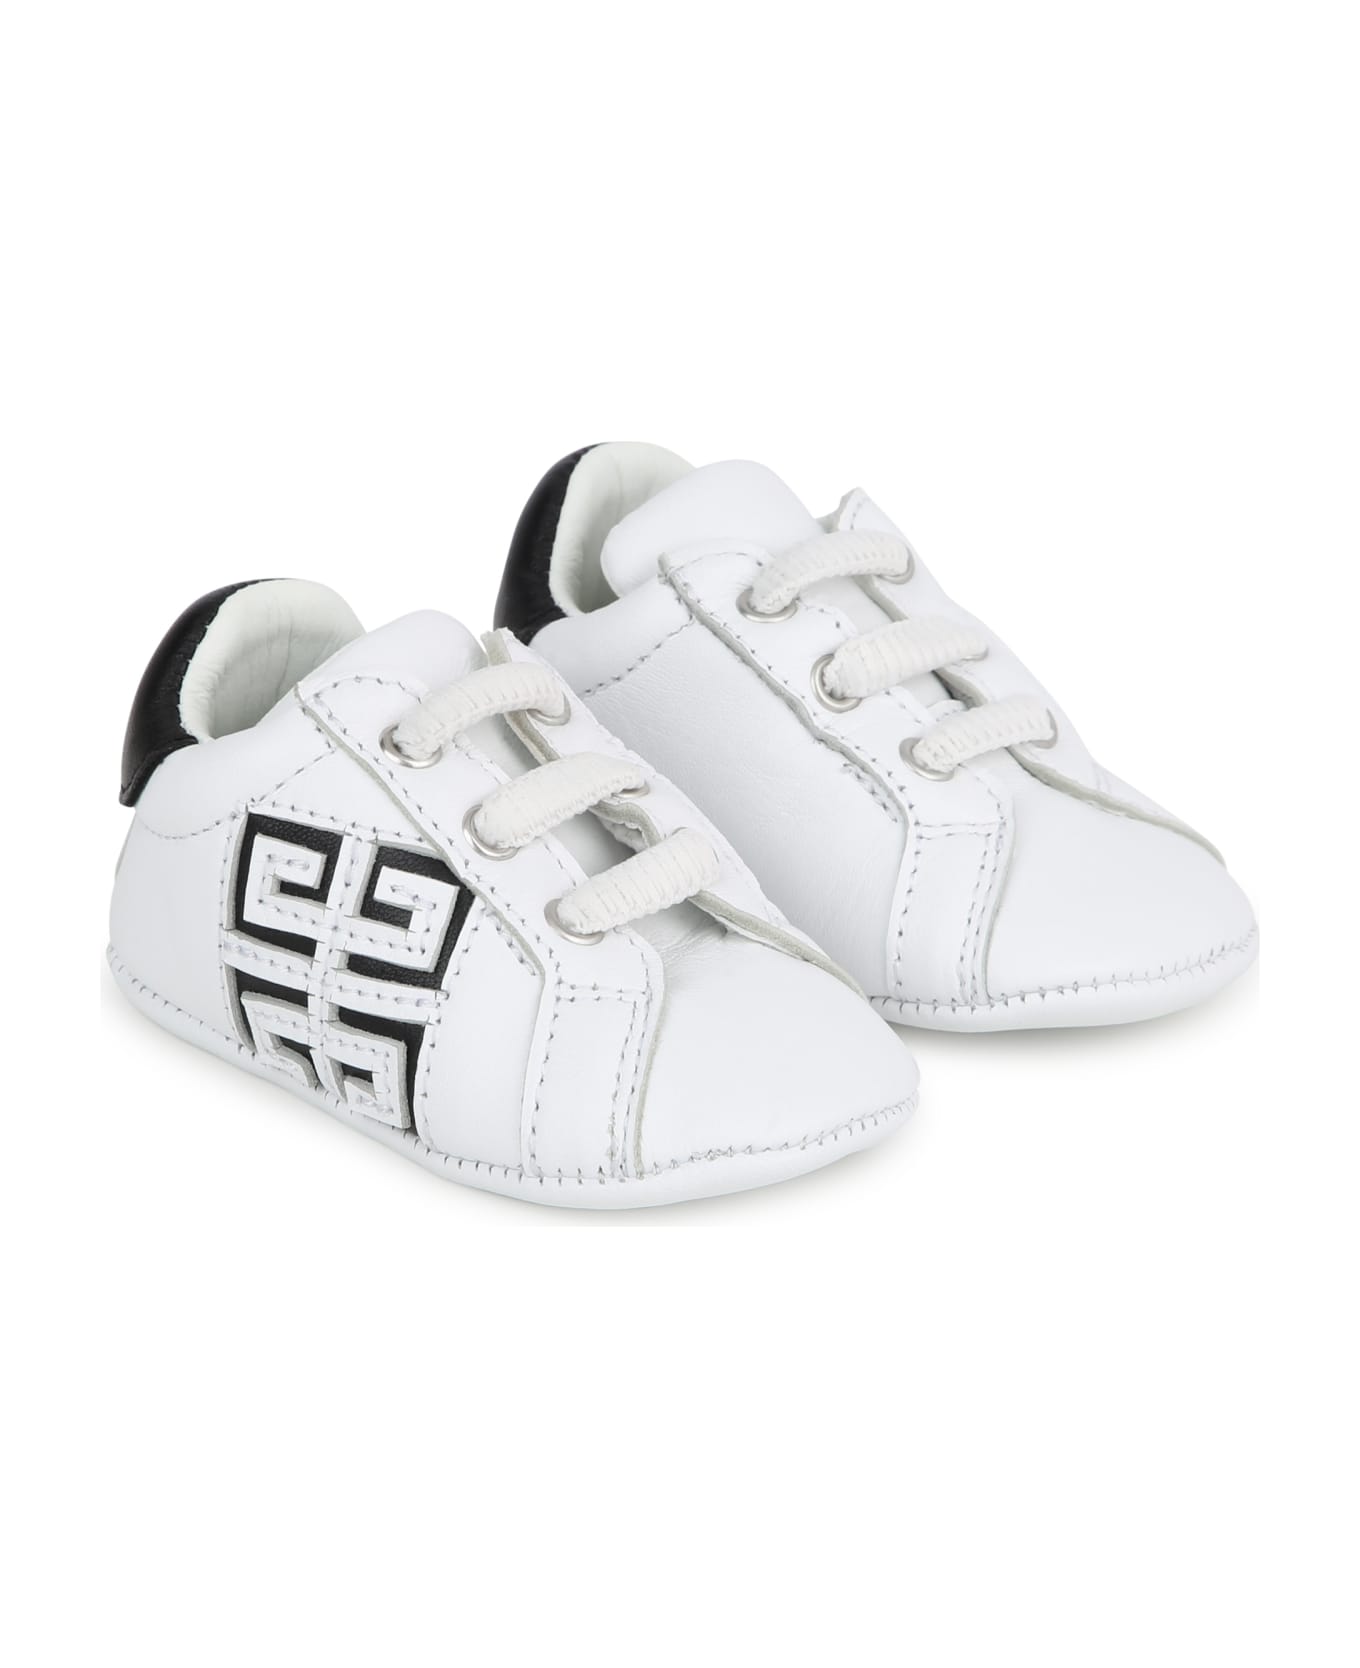 Givenchy 4g Leather Sneakers - White